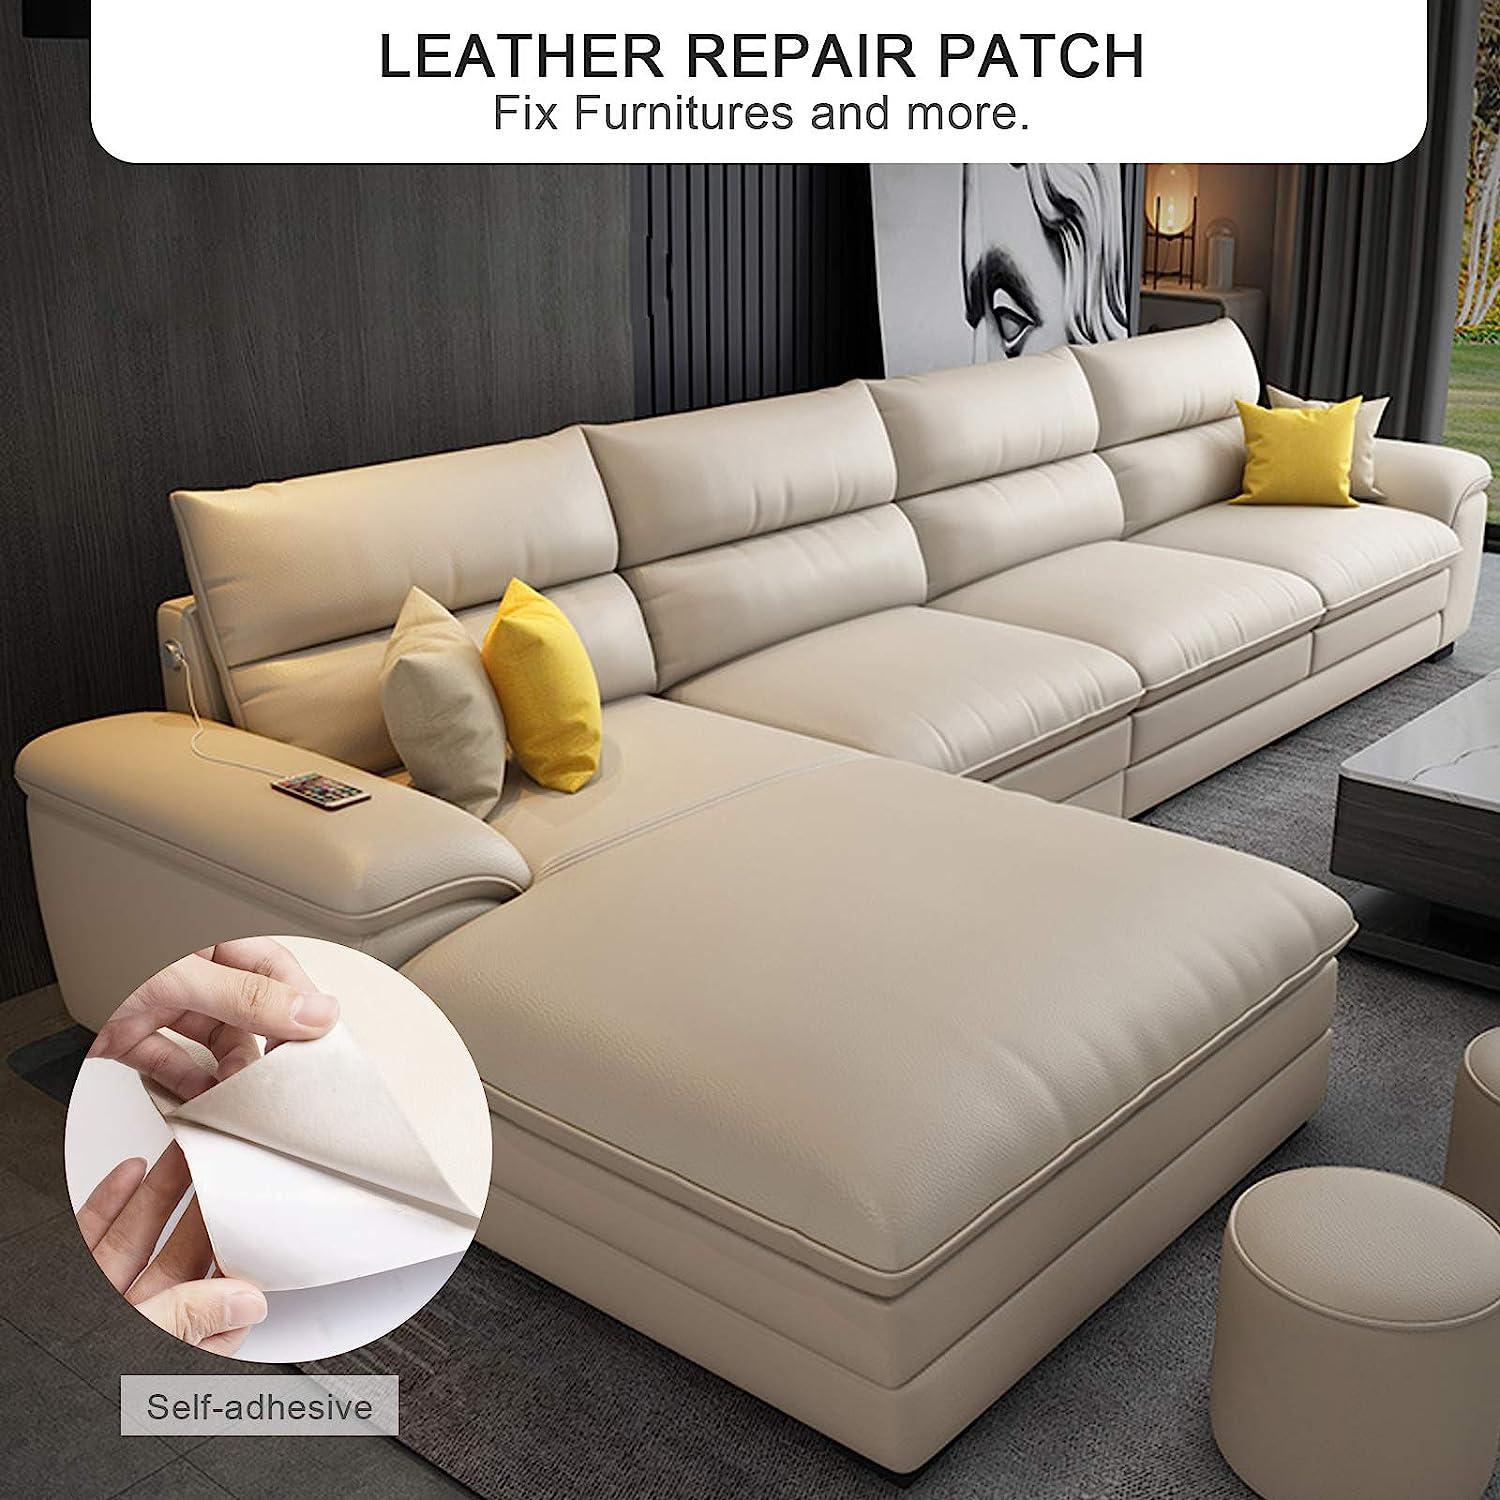 Leather Repair Tape Patch - 4 x 63 inch Leather Repair Patch Self Adhesive  Vinyl Repair Tape - Furniture Leather Repair Kit for Car Seats, Couches